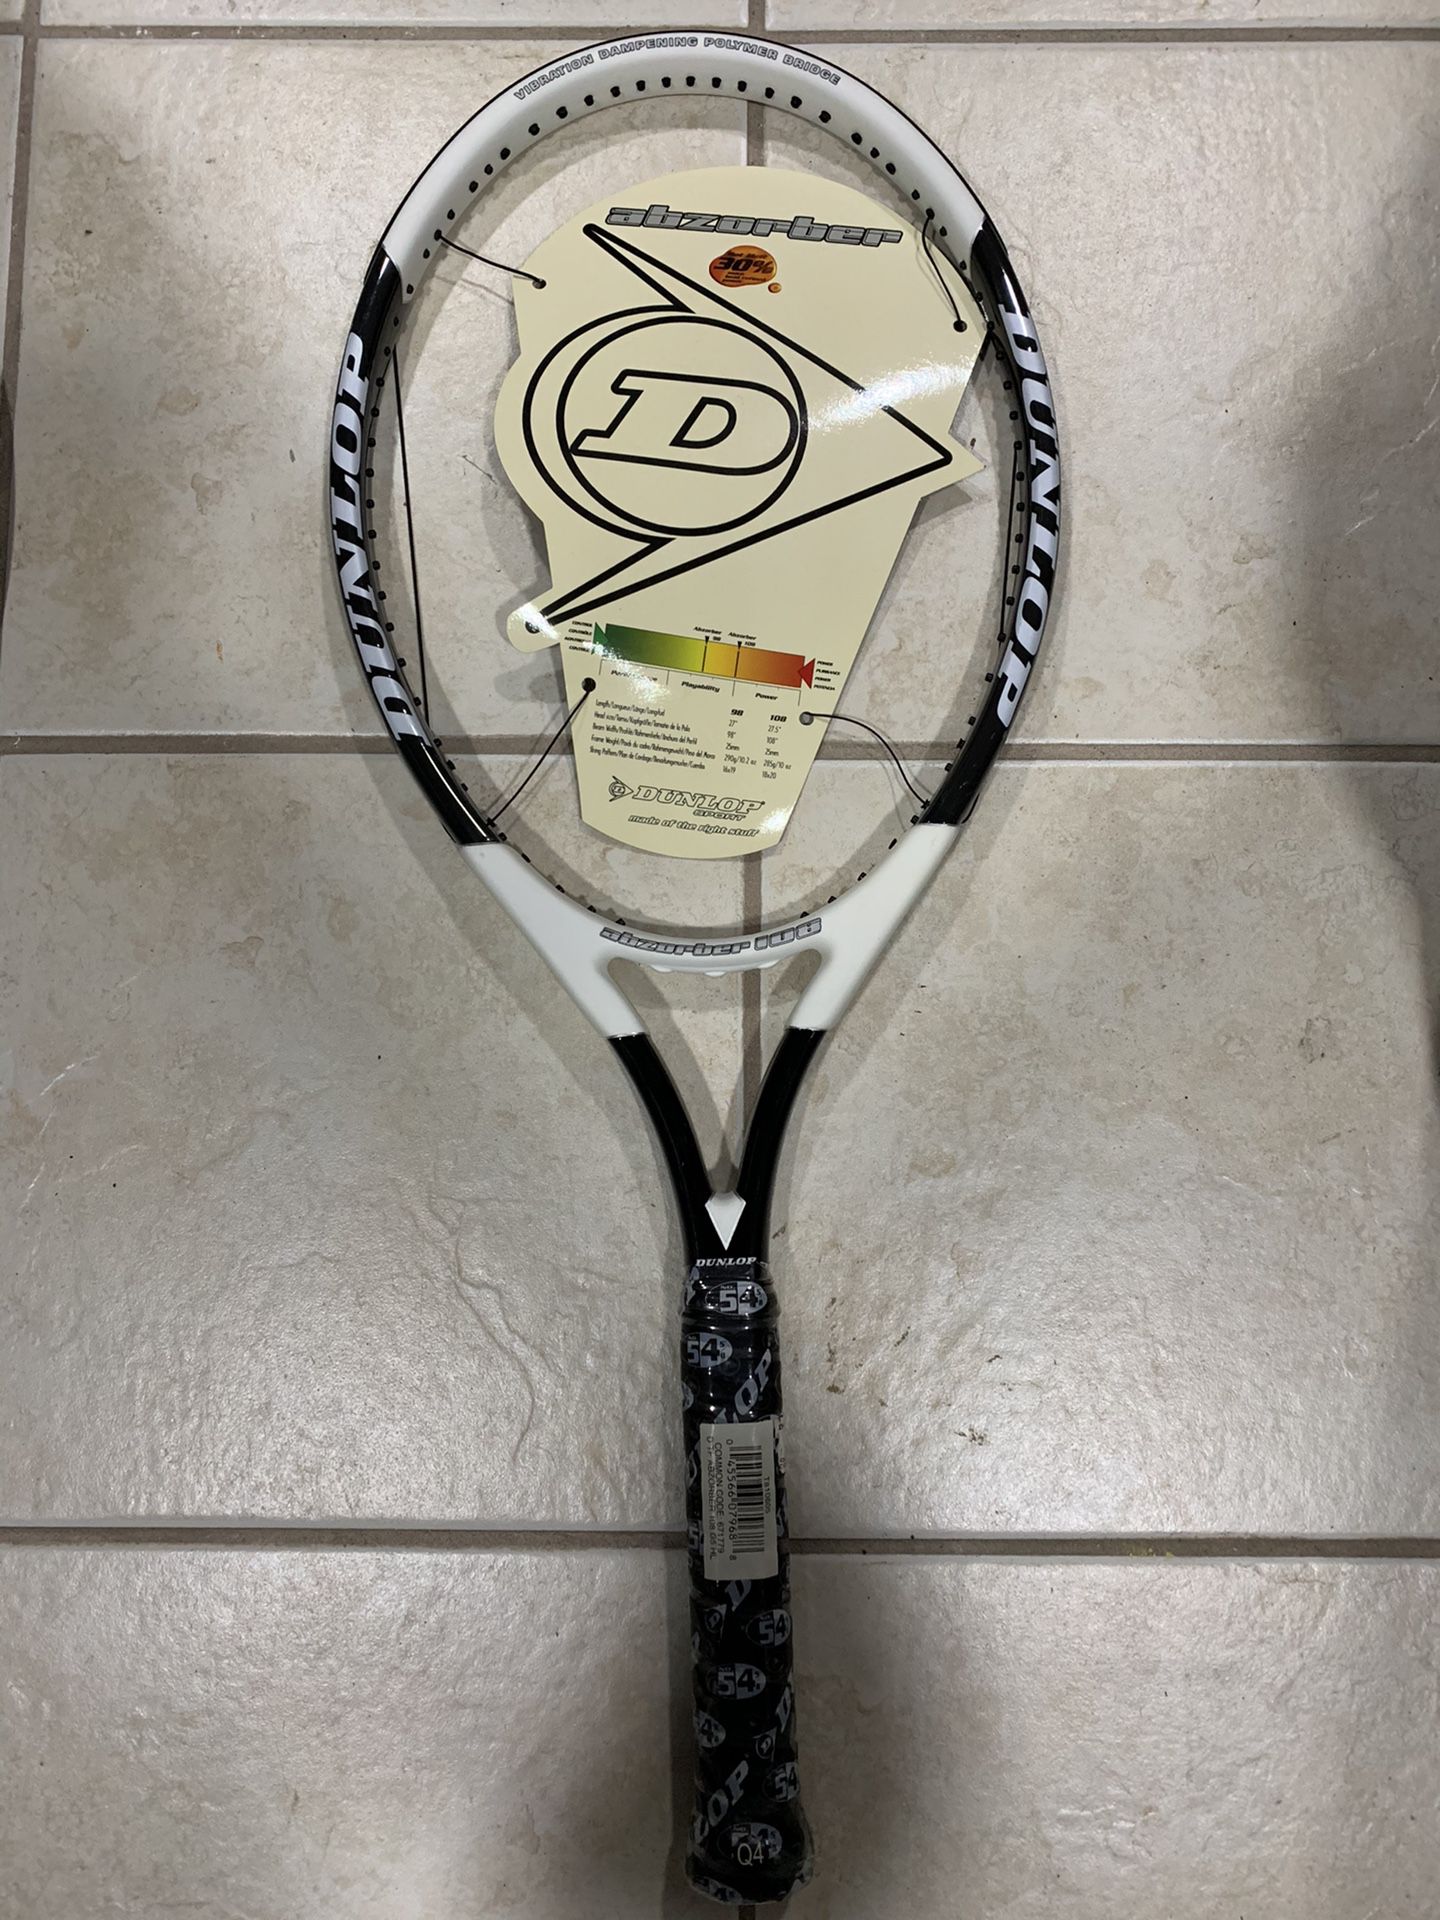 Tennis Racket Dunlop brand new never used needs to be strung to your custom specifications great racket light weight